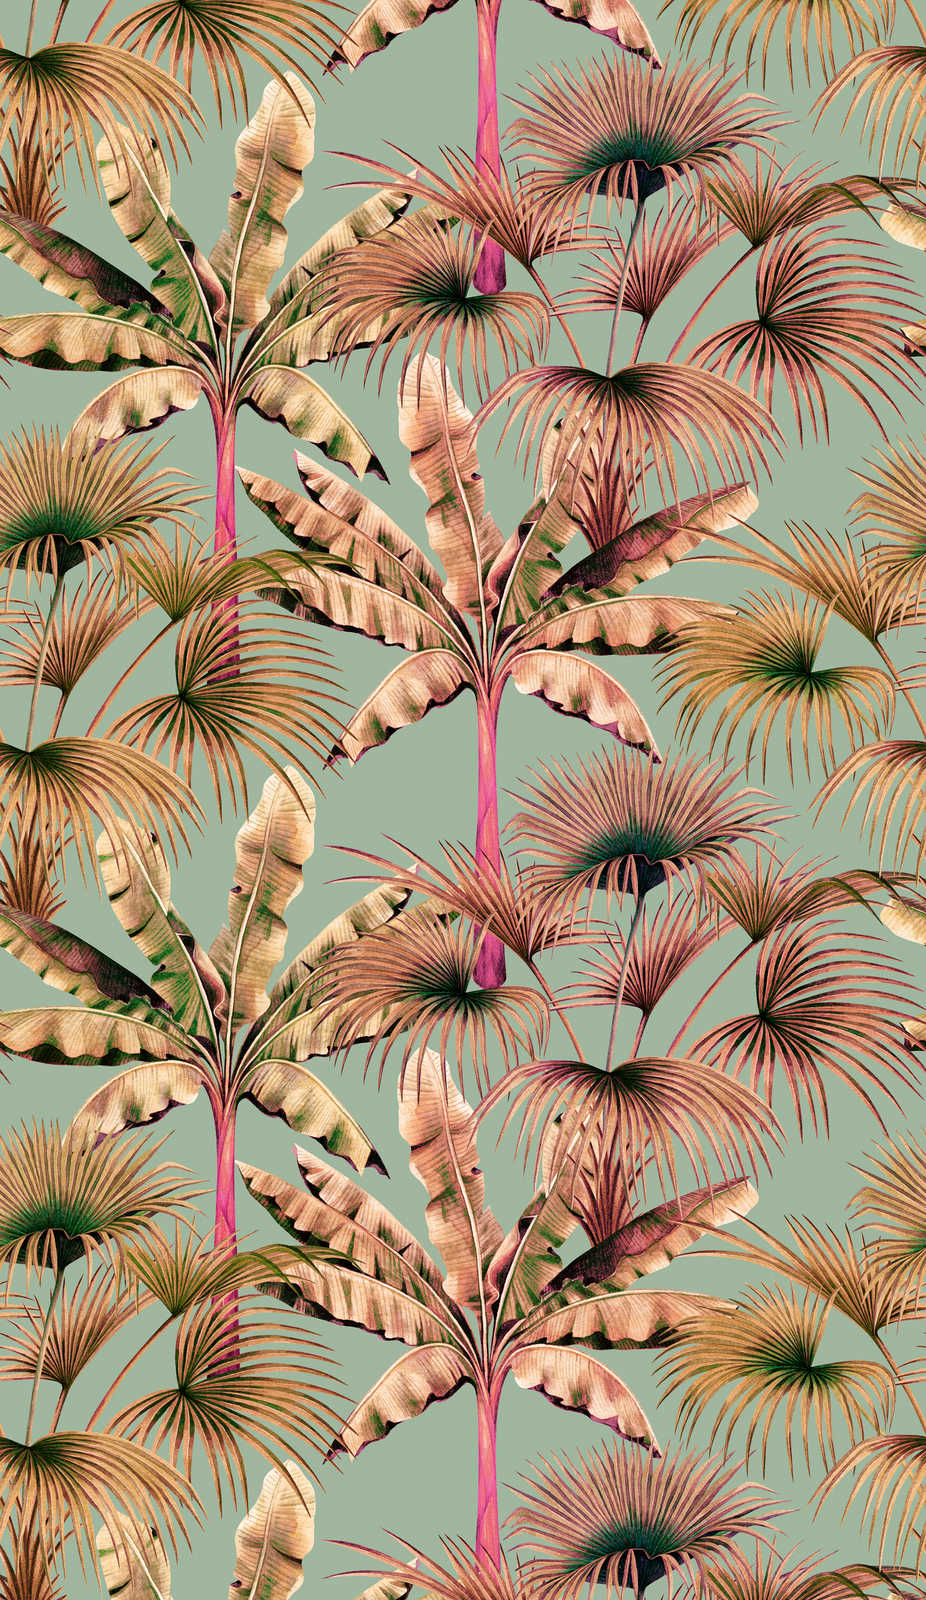             Non-woven wallpaper with colourful leaf pattern - blue, beige, pink
        